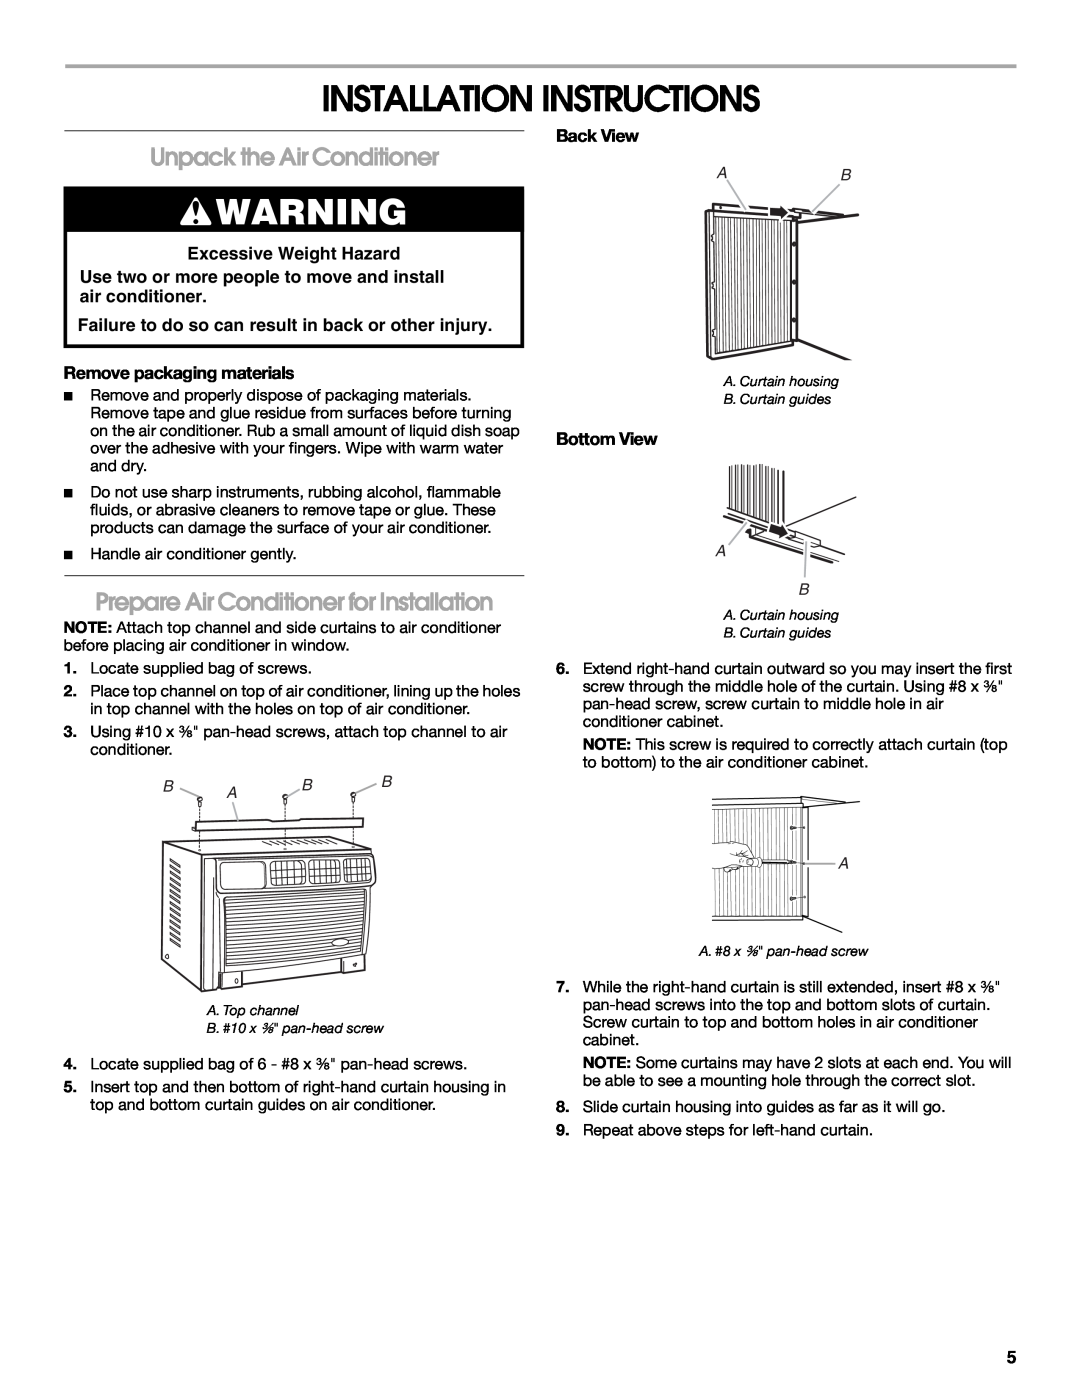 Whirlpool ACM122XR0 manual Installation Instructions, Unpack the Air Conditioner, Prepare Air Conditioner for Installation 